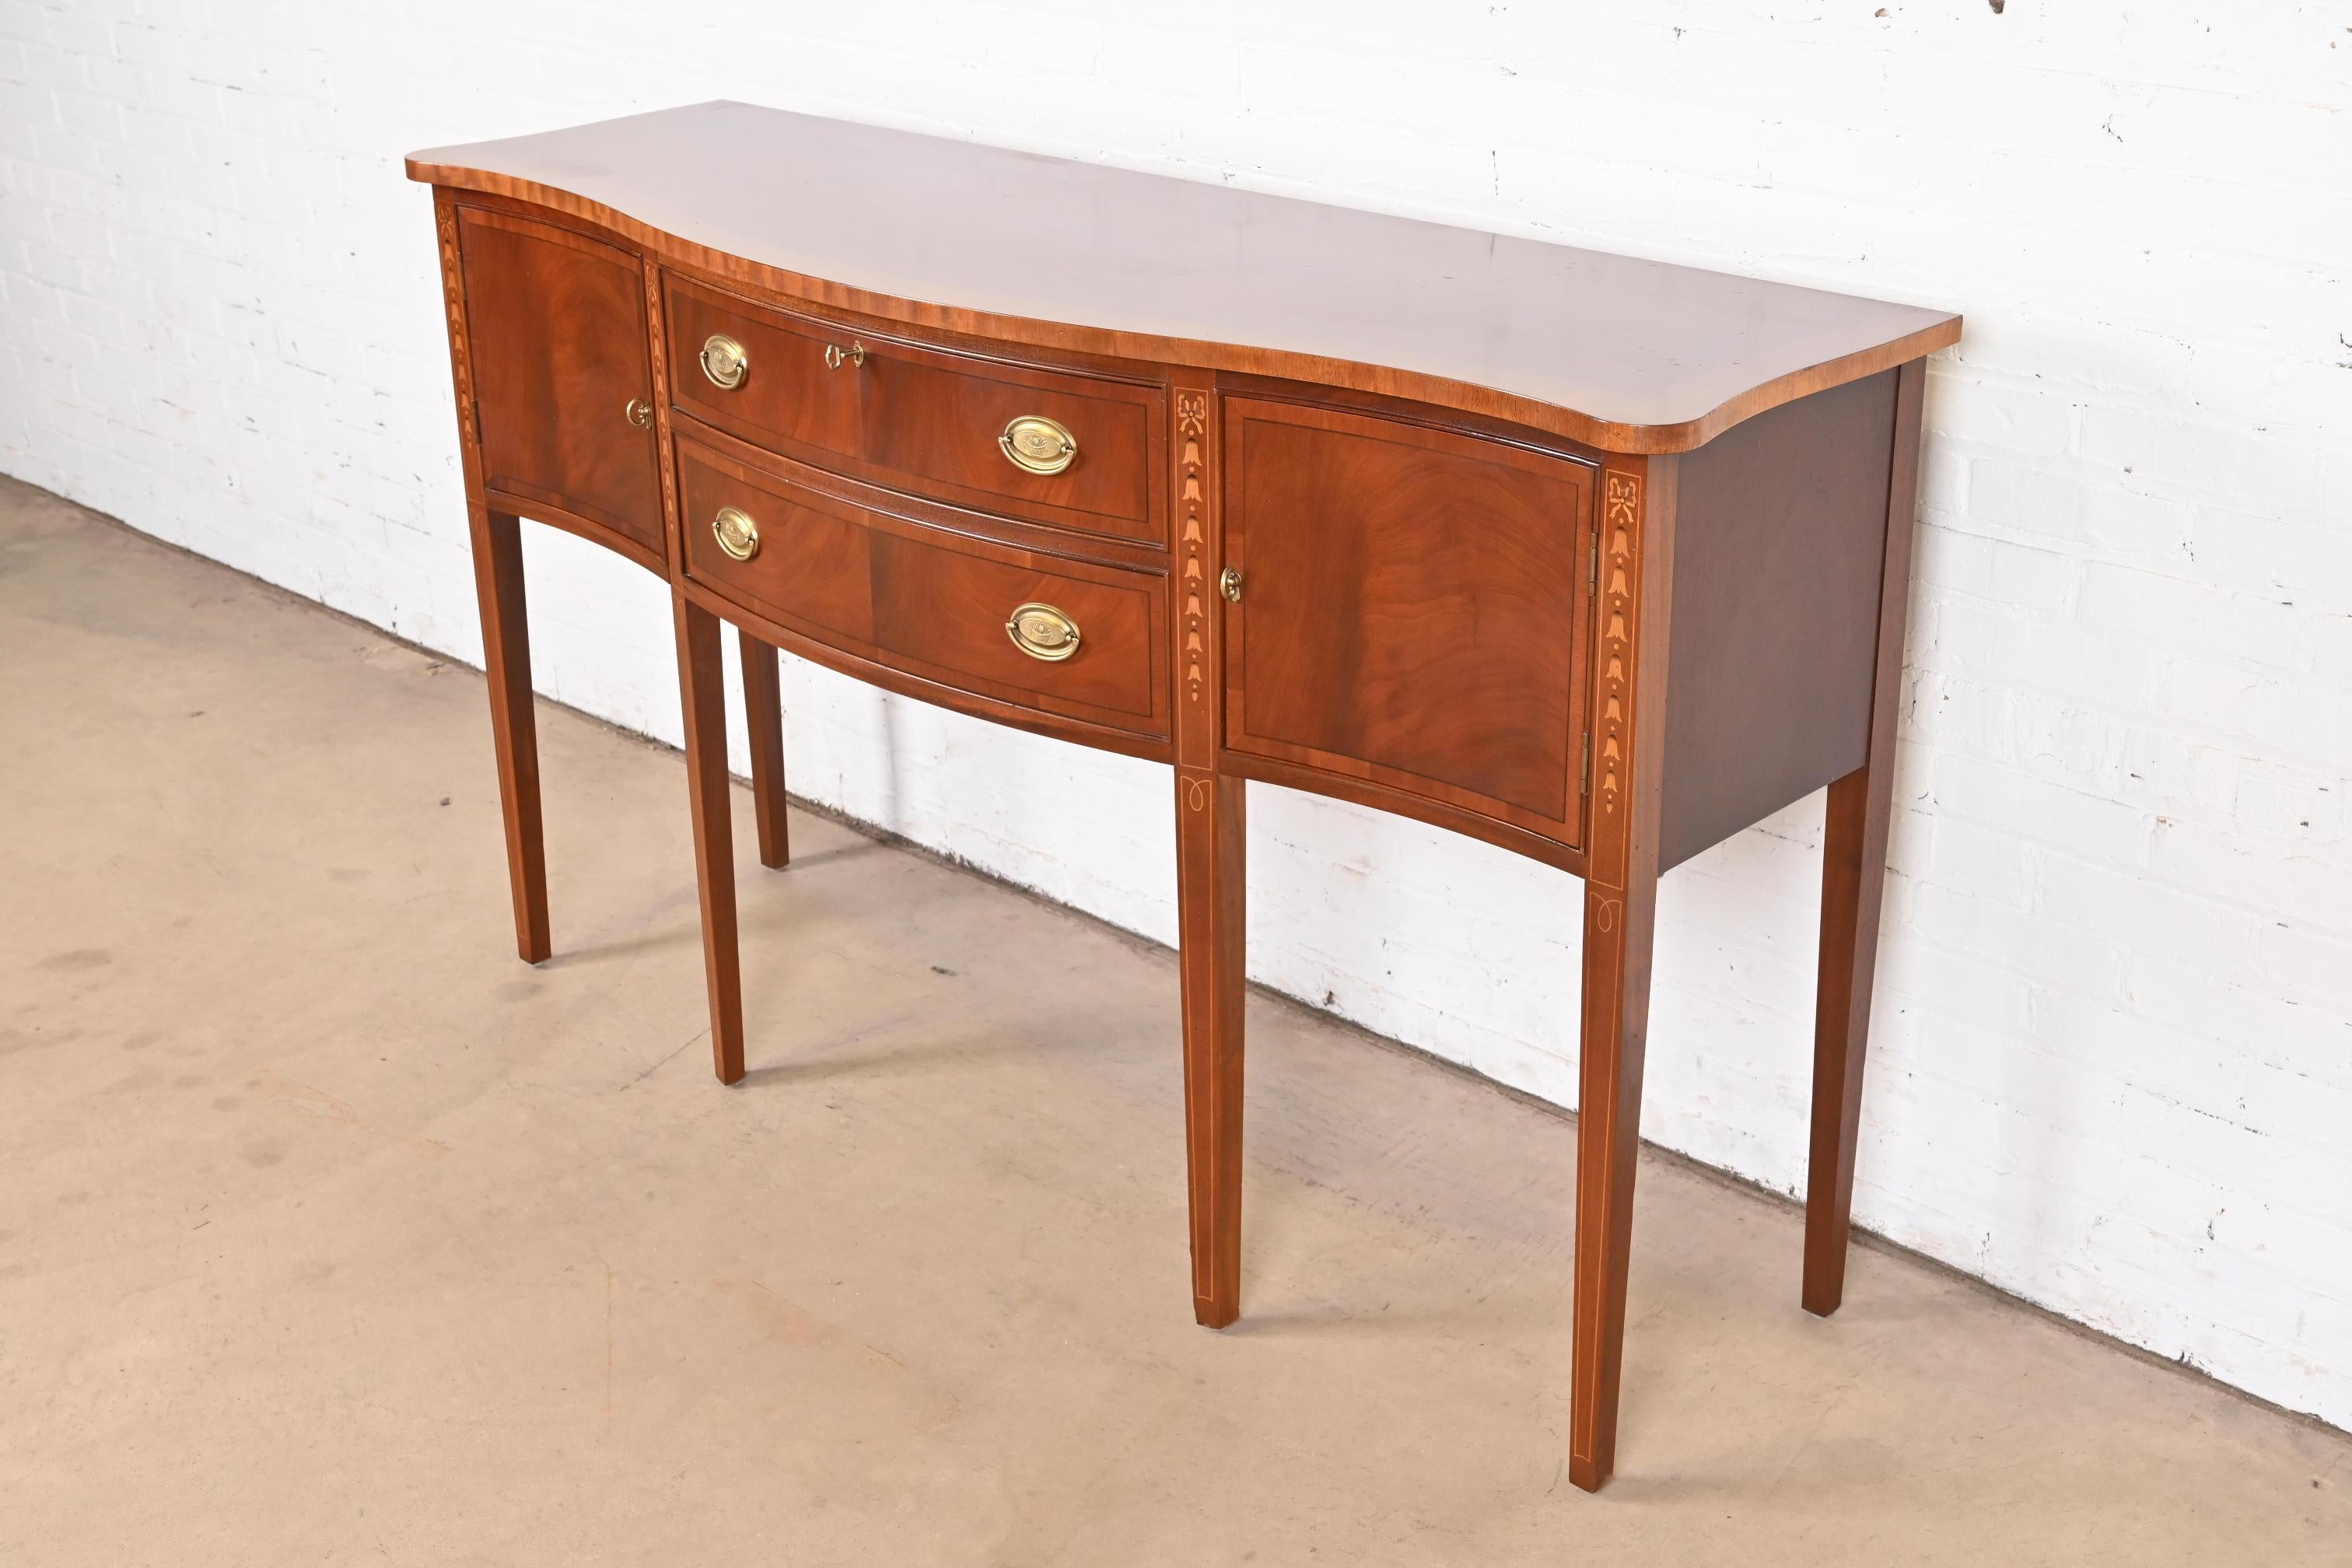 20th Century Hepplewhite Inlaid Mahogany Serpentine Front Sideboard Buffet or Credenza